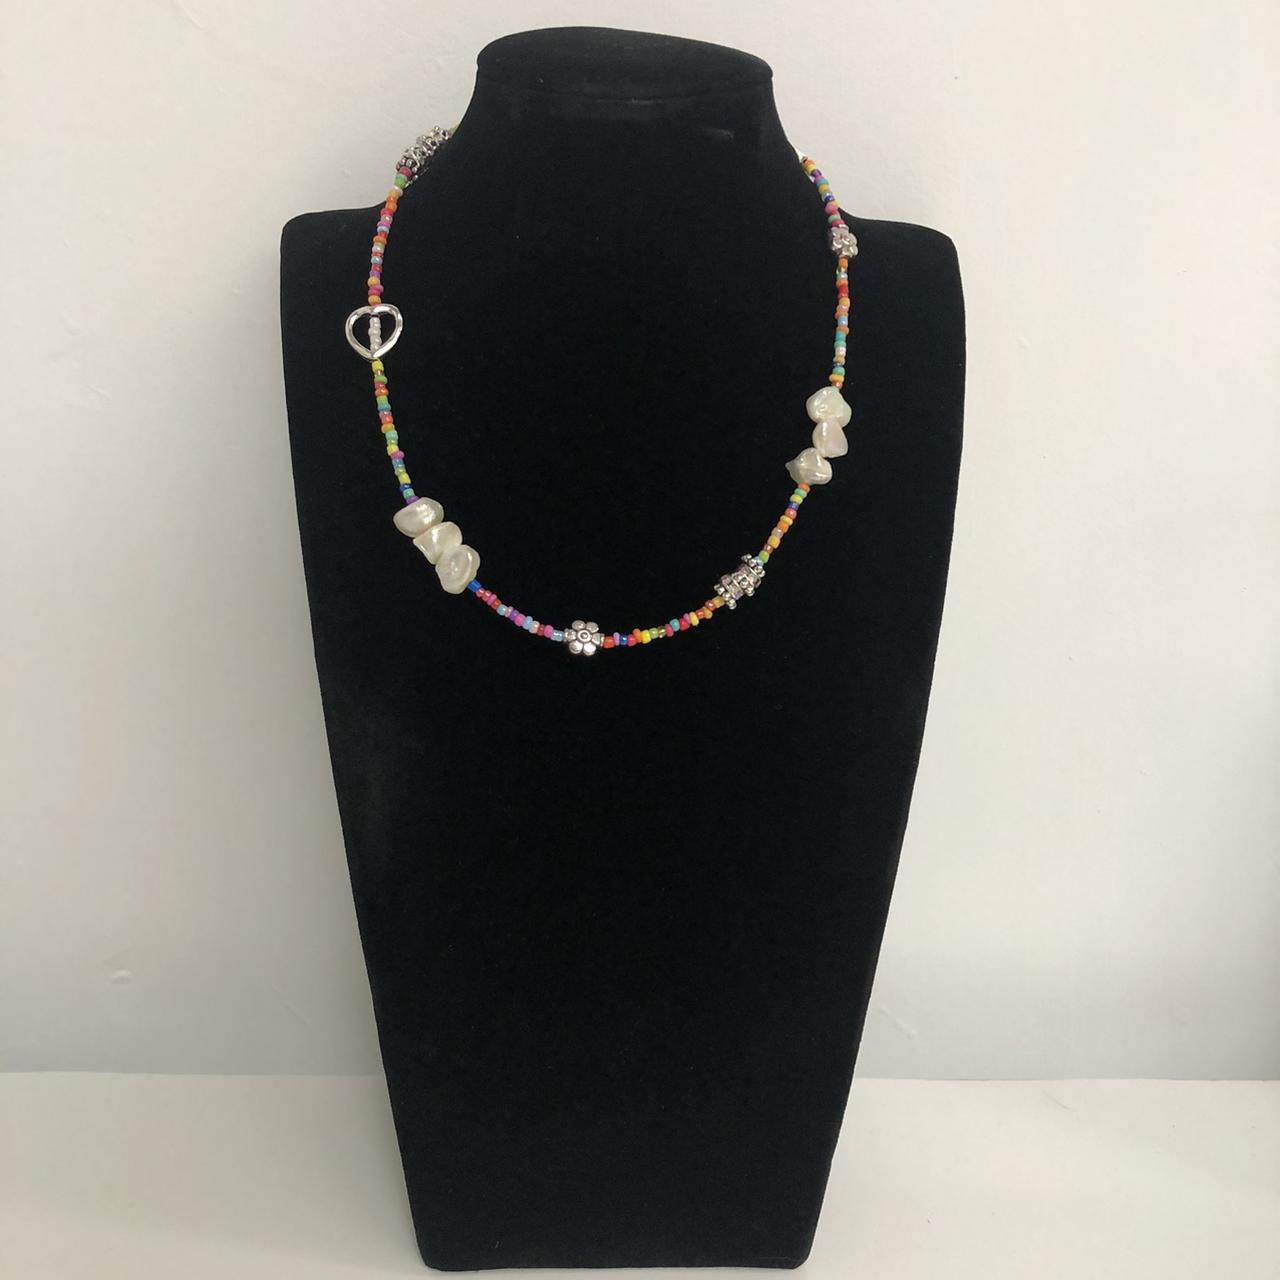 Product Image 2 - Multicolor Seed Bead Choker Necklace